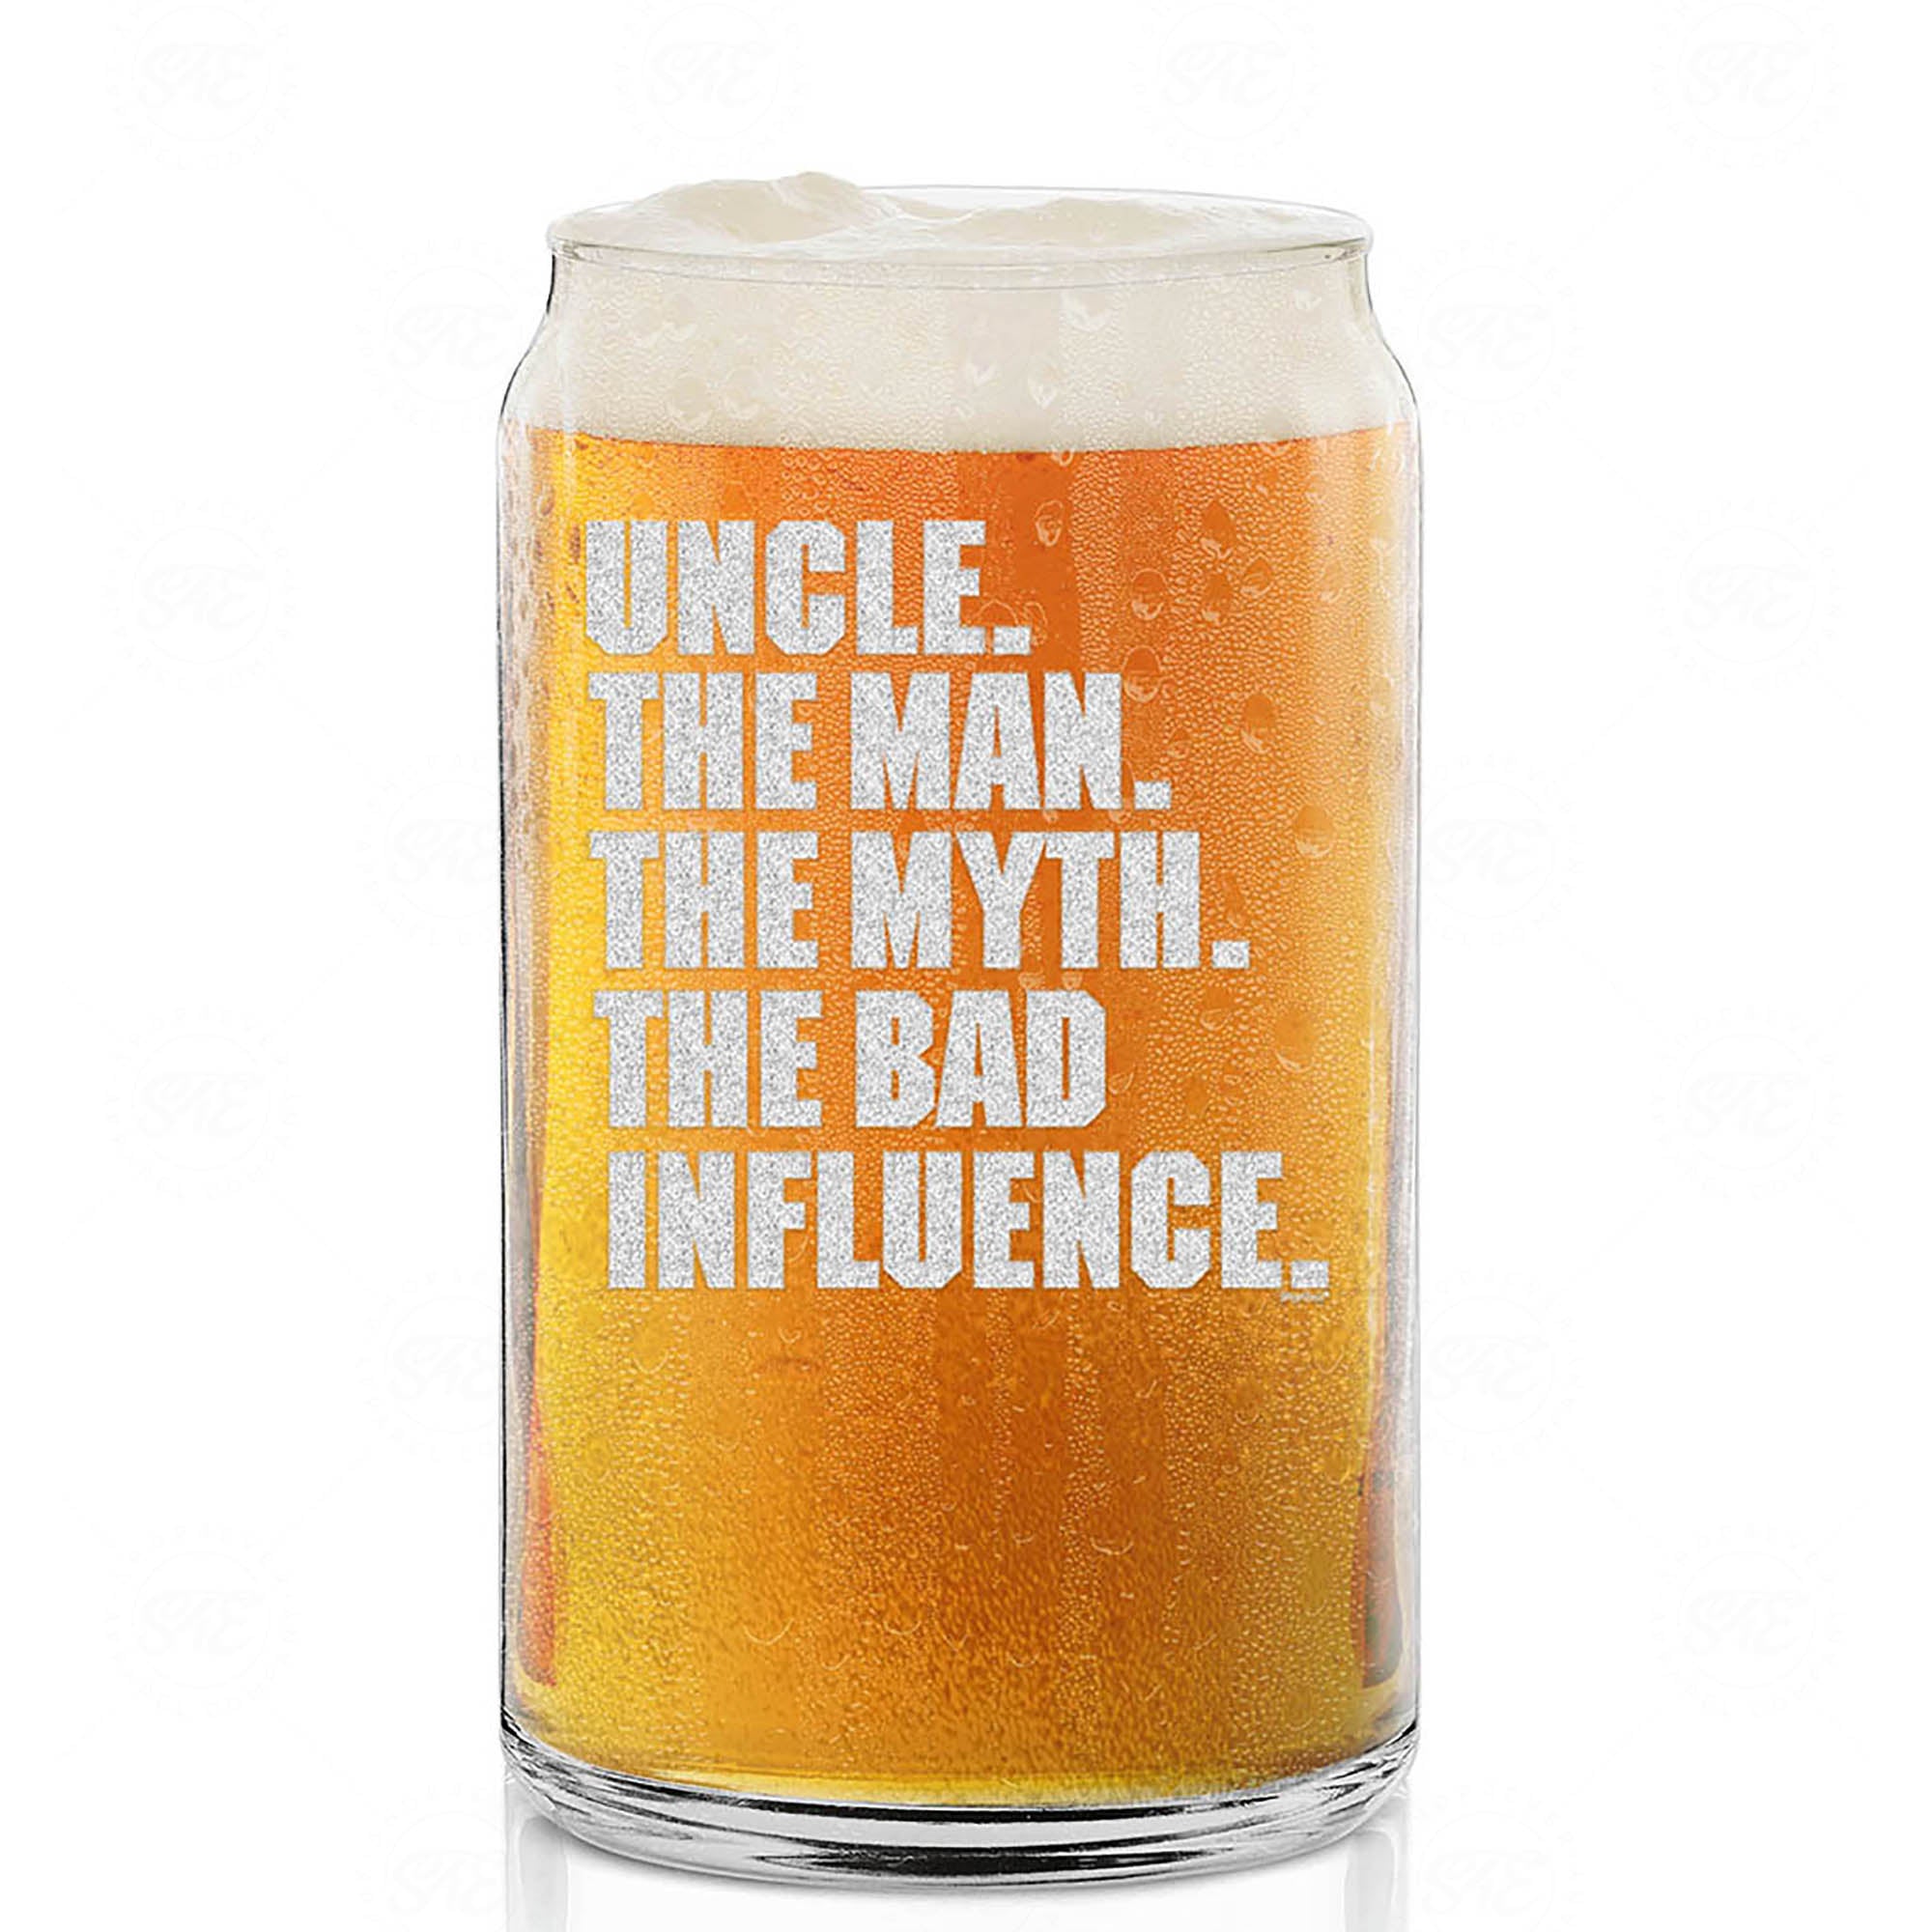 Uncle. The Man. The Myth. The Bad Influence. Engraved Beer Can Glass Funny Uncle Glass Gift